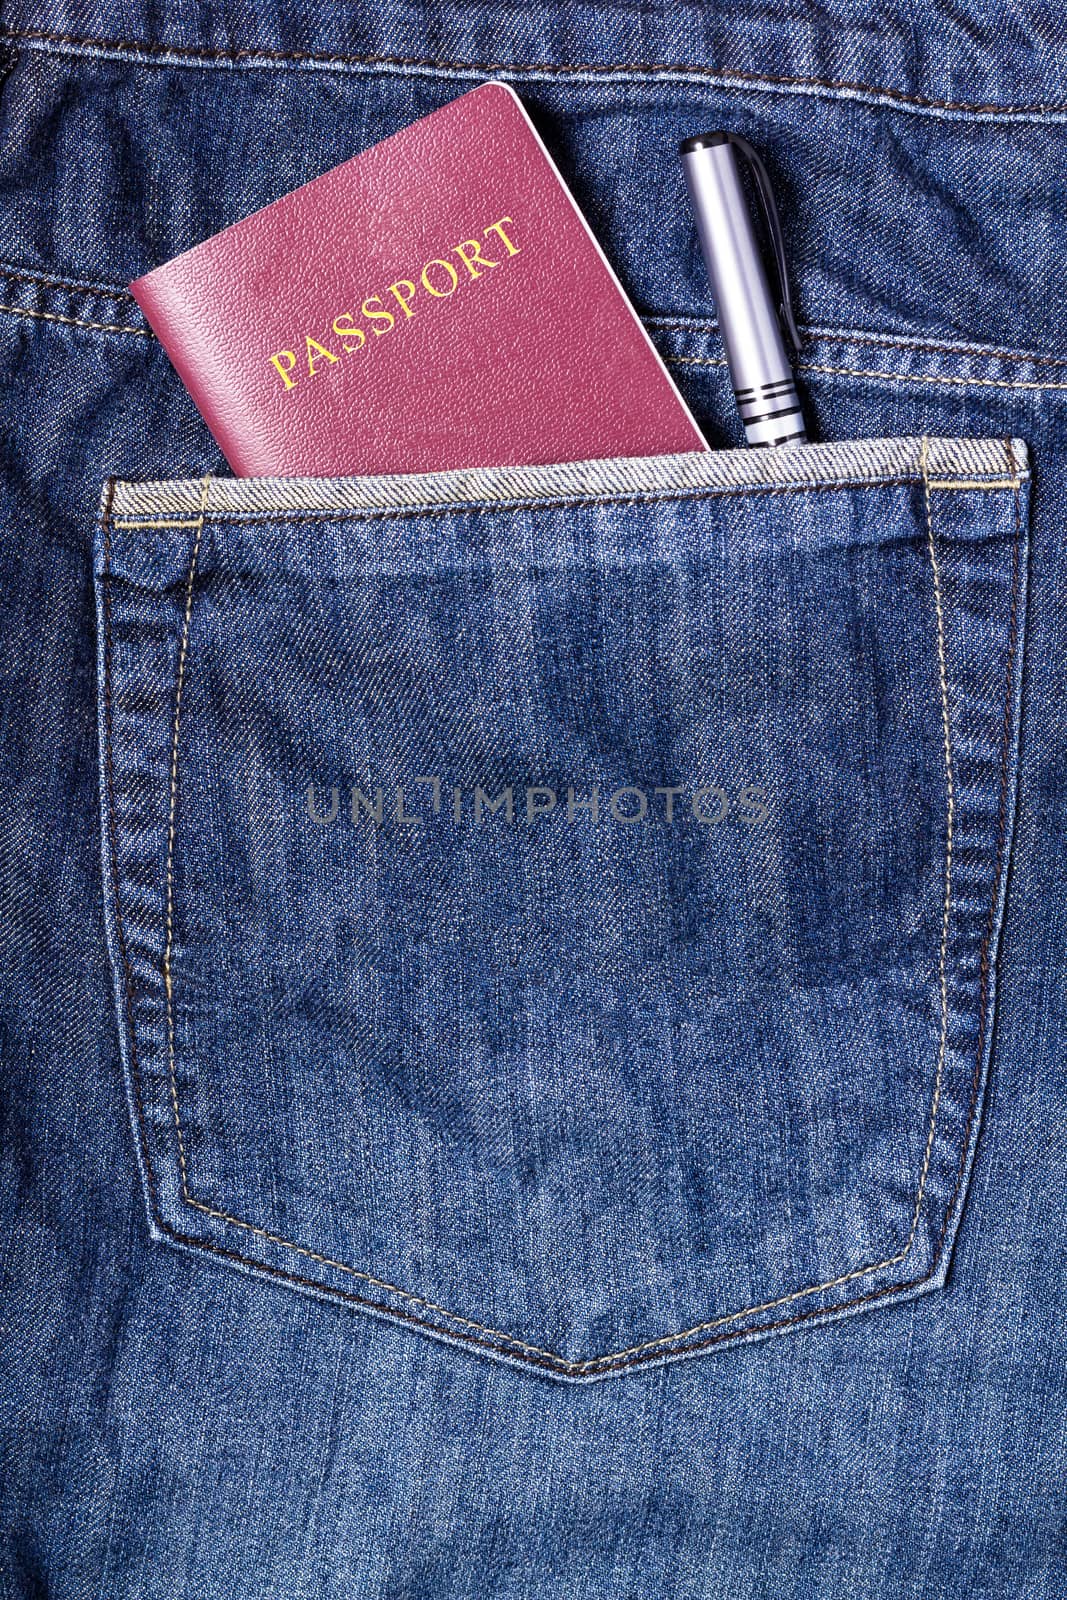 Passport and Pen in Jean Pocket by Fnatic12